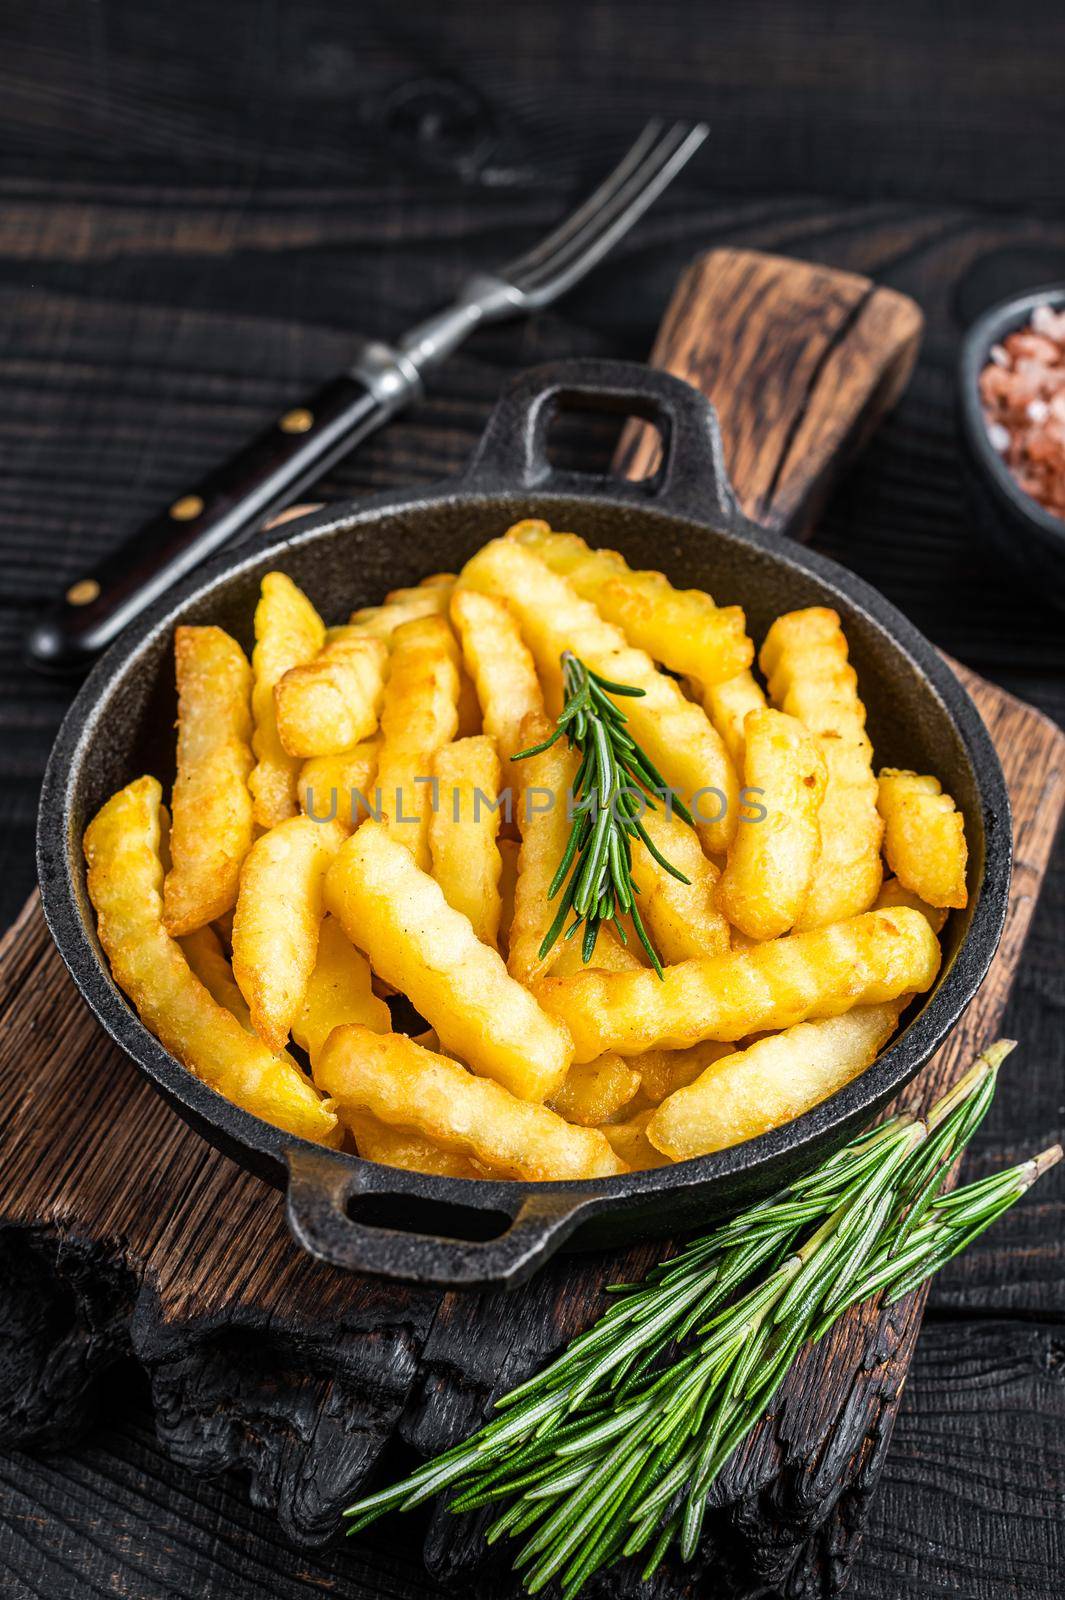 Fried Crinkle French fries potatoes in a pan. Black Wooden background. Top view by Composter